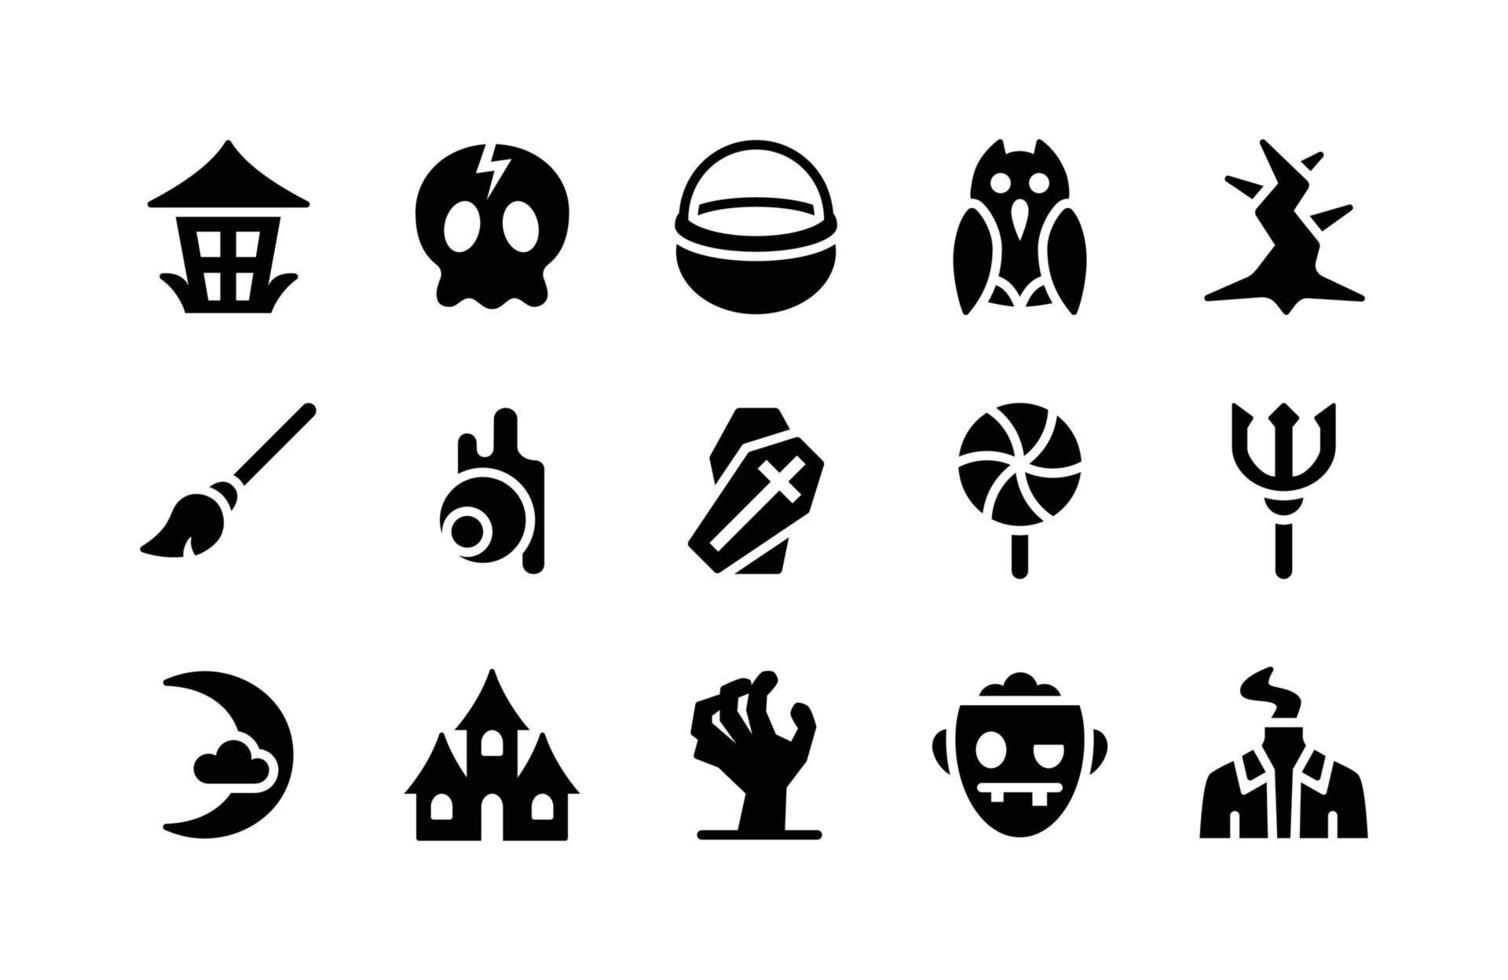 Halloween glyph icons including Lamp, Skull,  Couldron, Owl, Tree, Broom, Eyes, Coffin, Candy,Trident, Moon, House, Hand, Zombie, Body vector